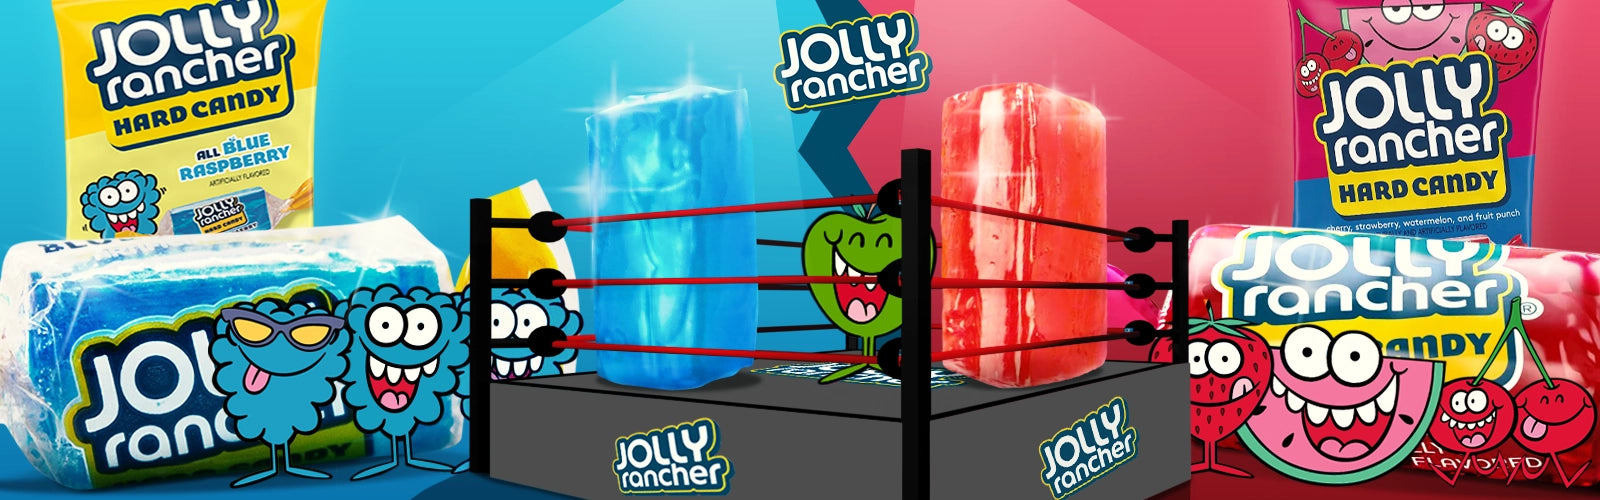 Jolly Rancher in collection banner